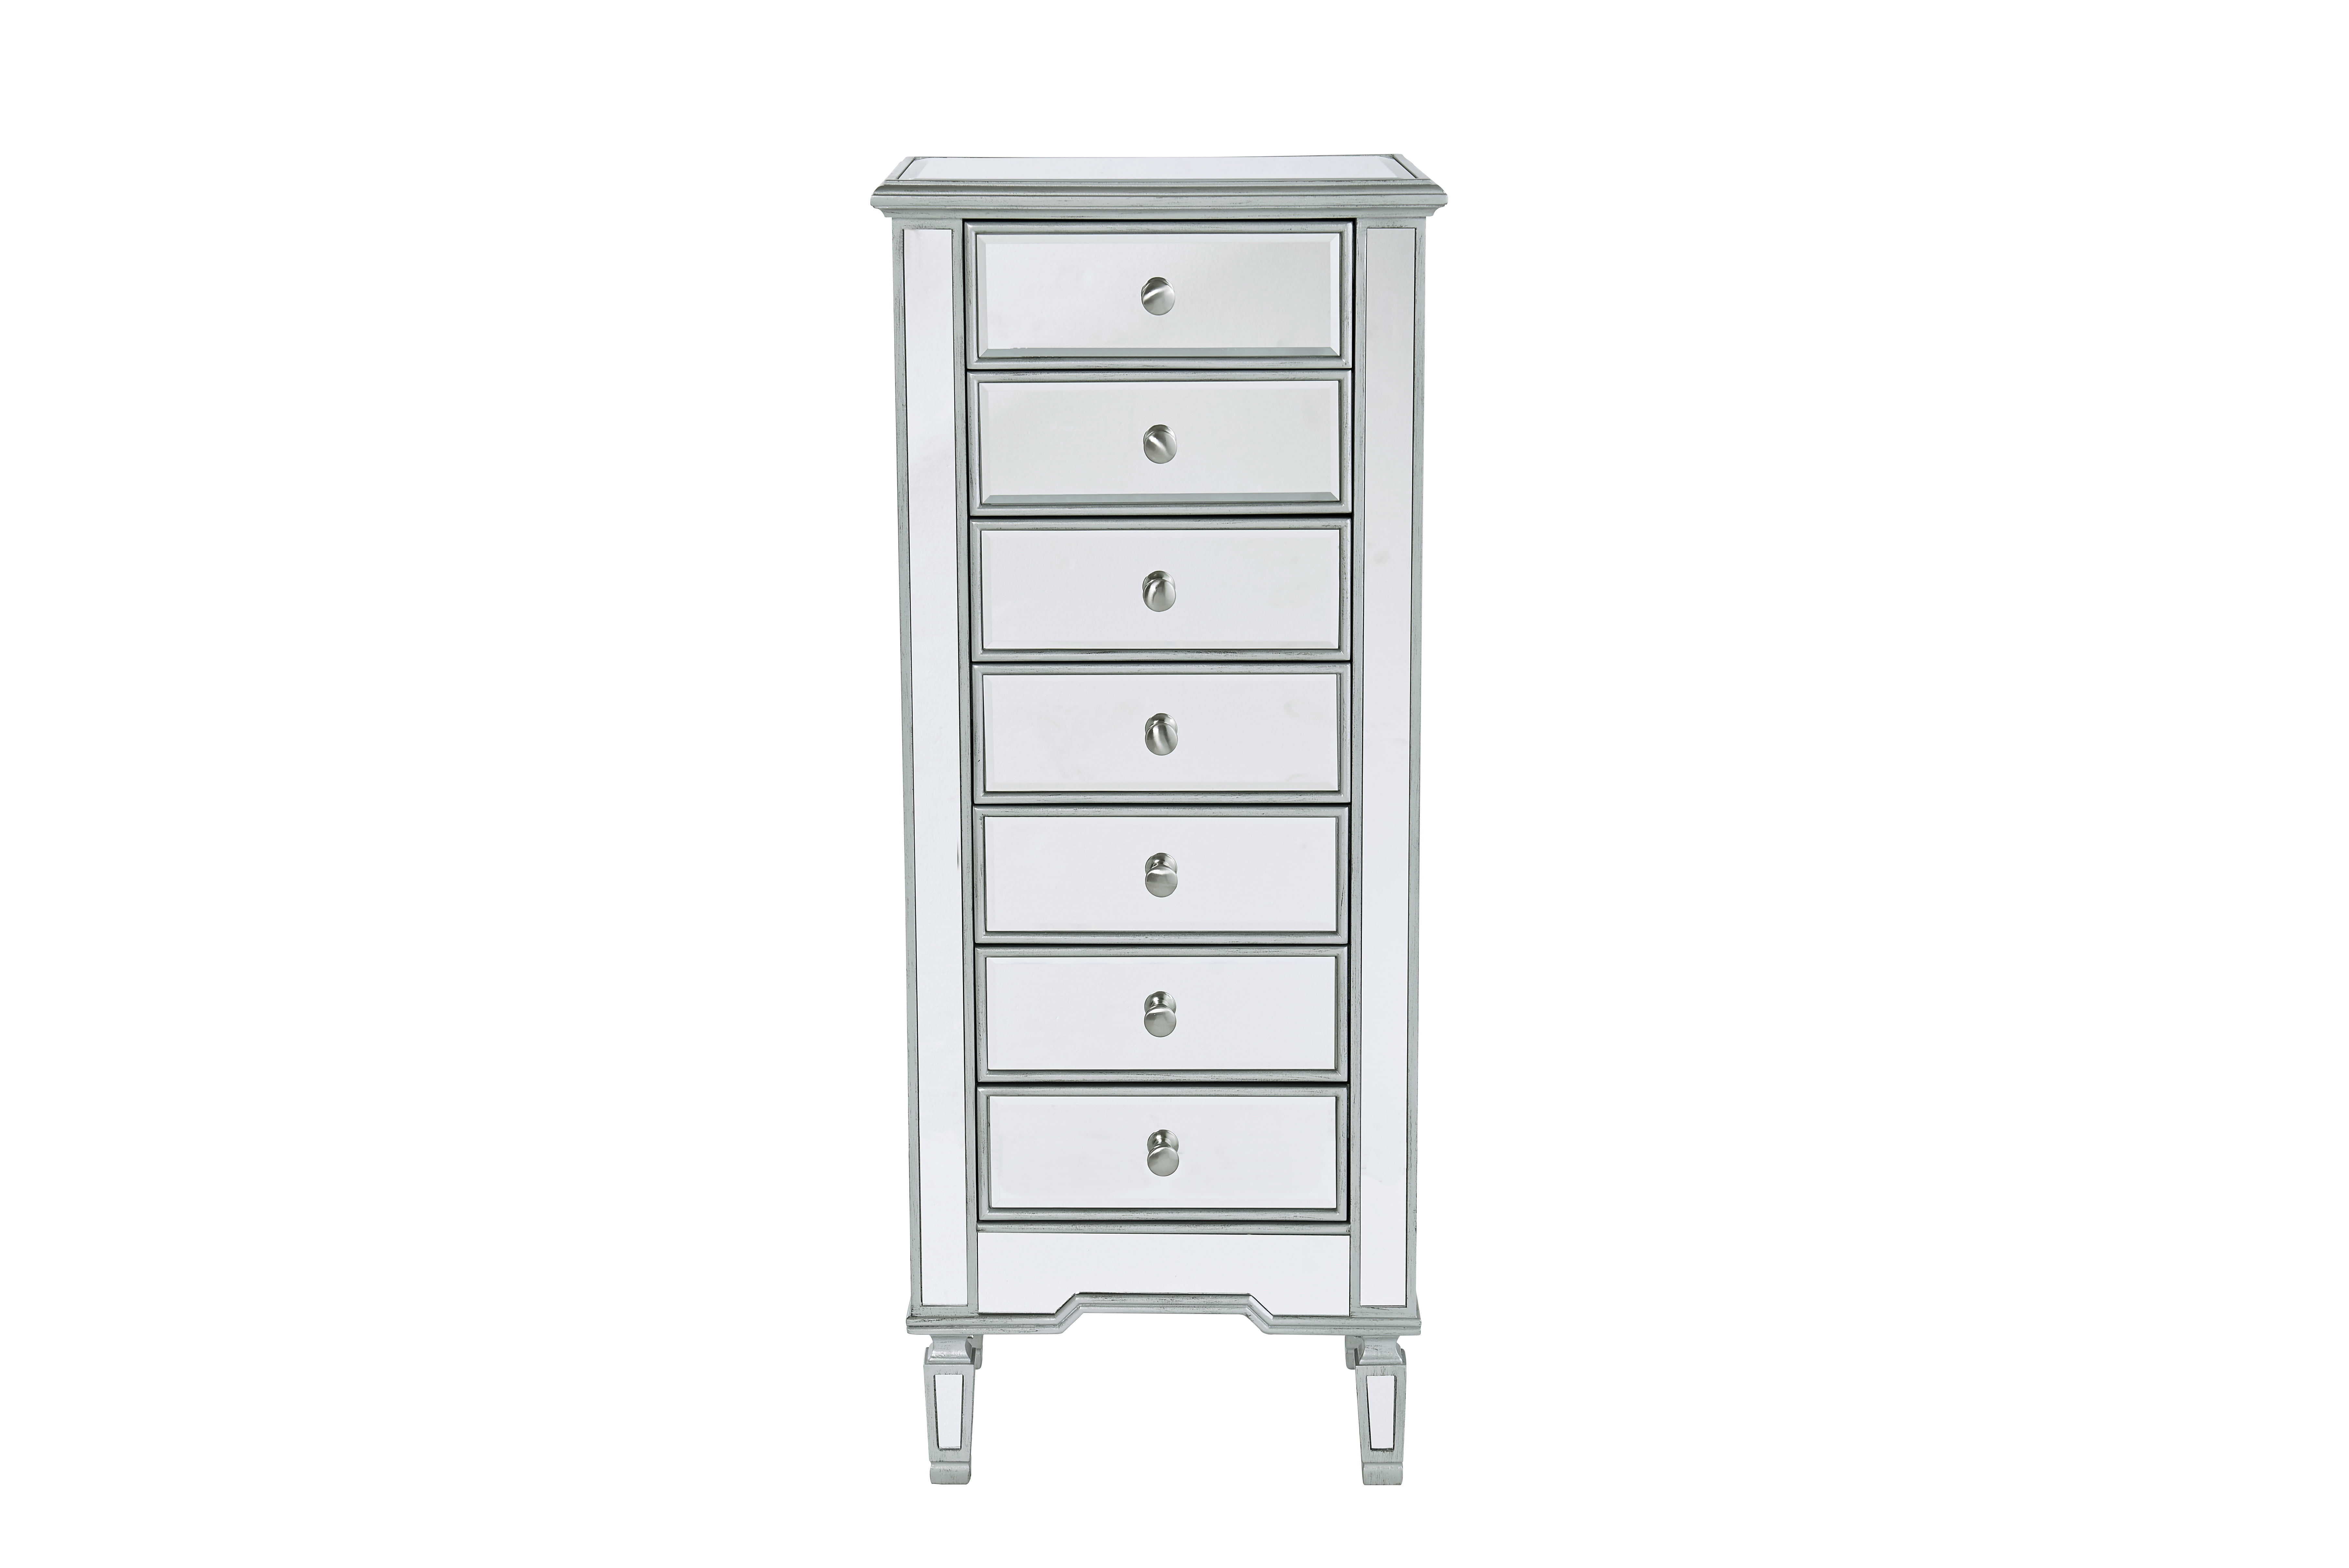 Lingerie Chest 7 drawers 20in. W x 15in. D x 48in. H in antique silver ...